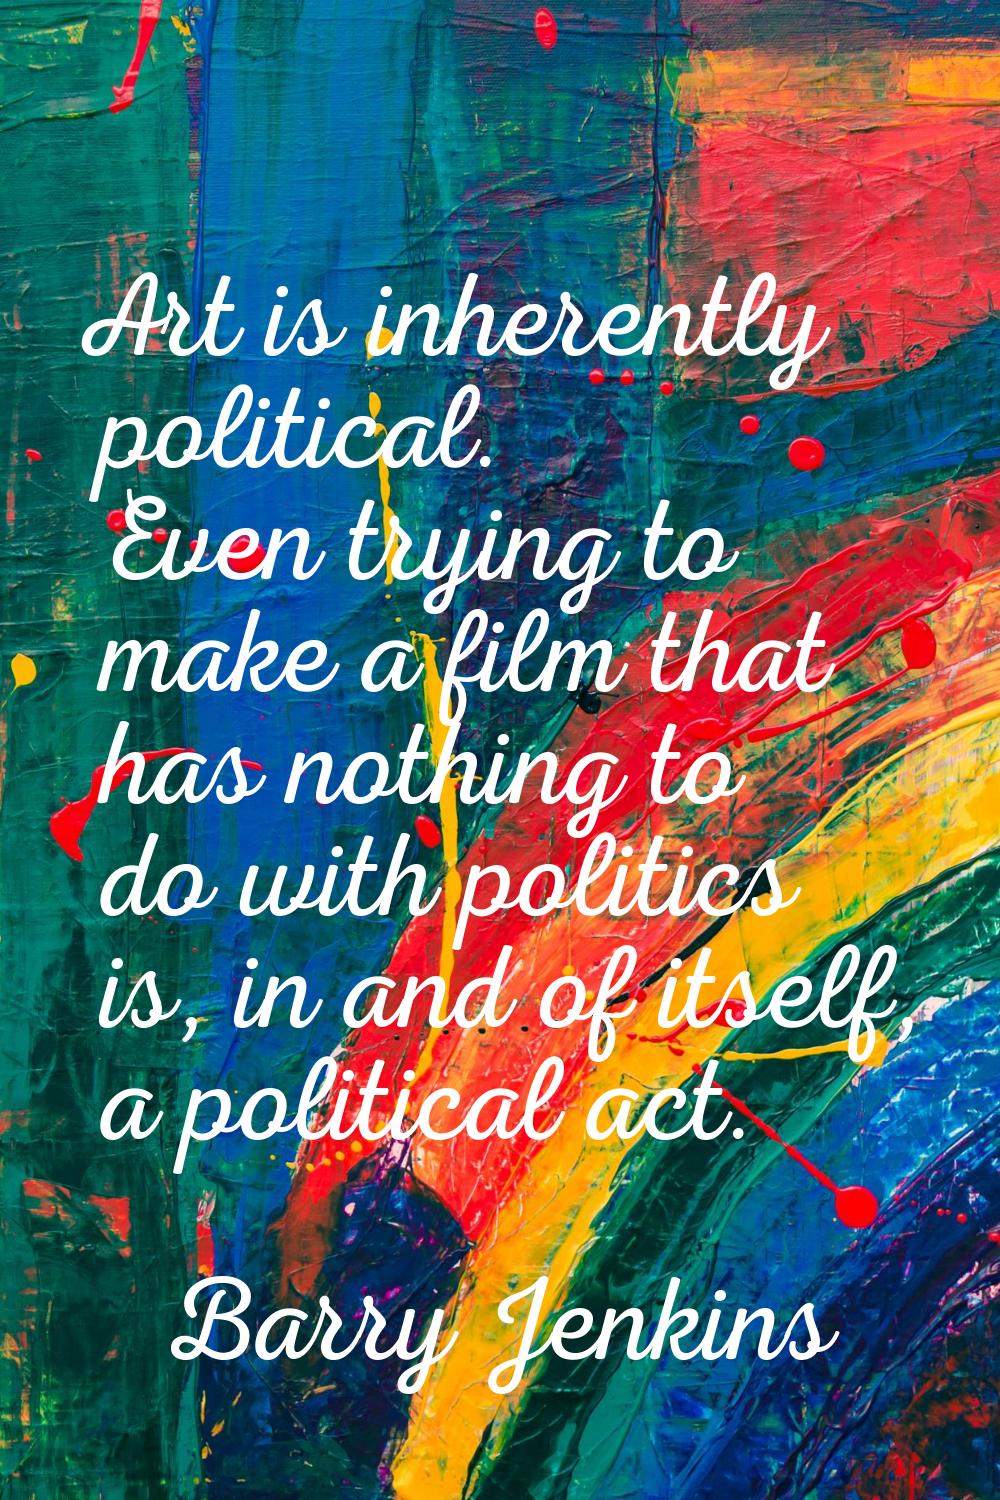 Art is inherently political. Even trying to make a film that has nothing to do with politics is, in